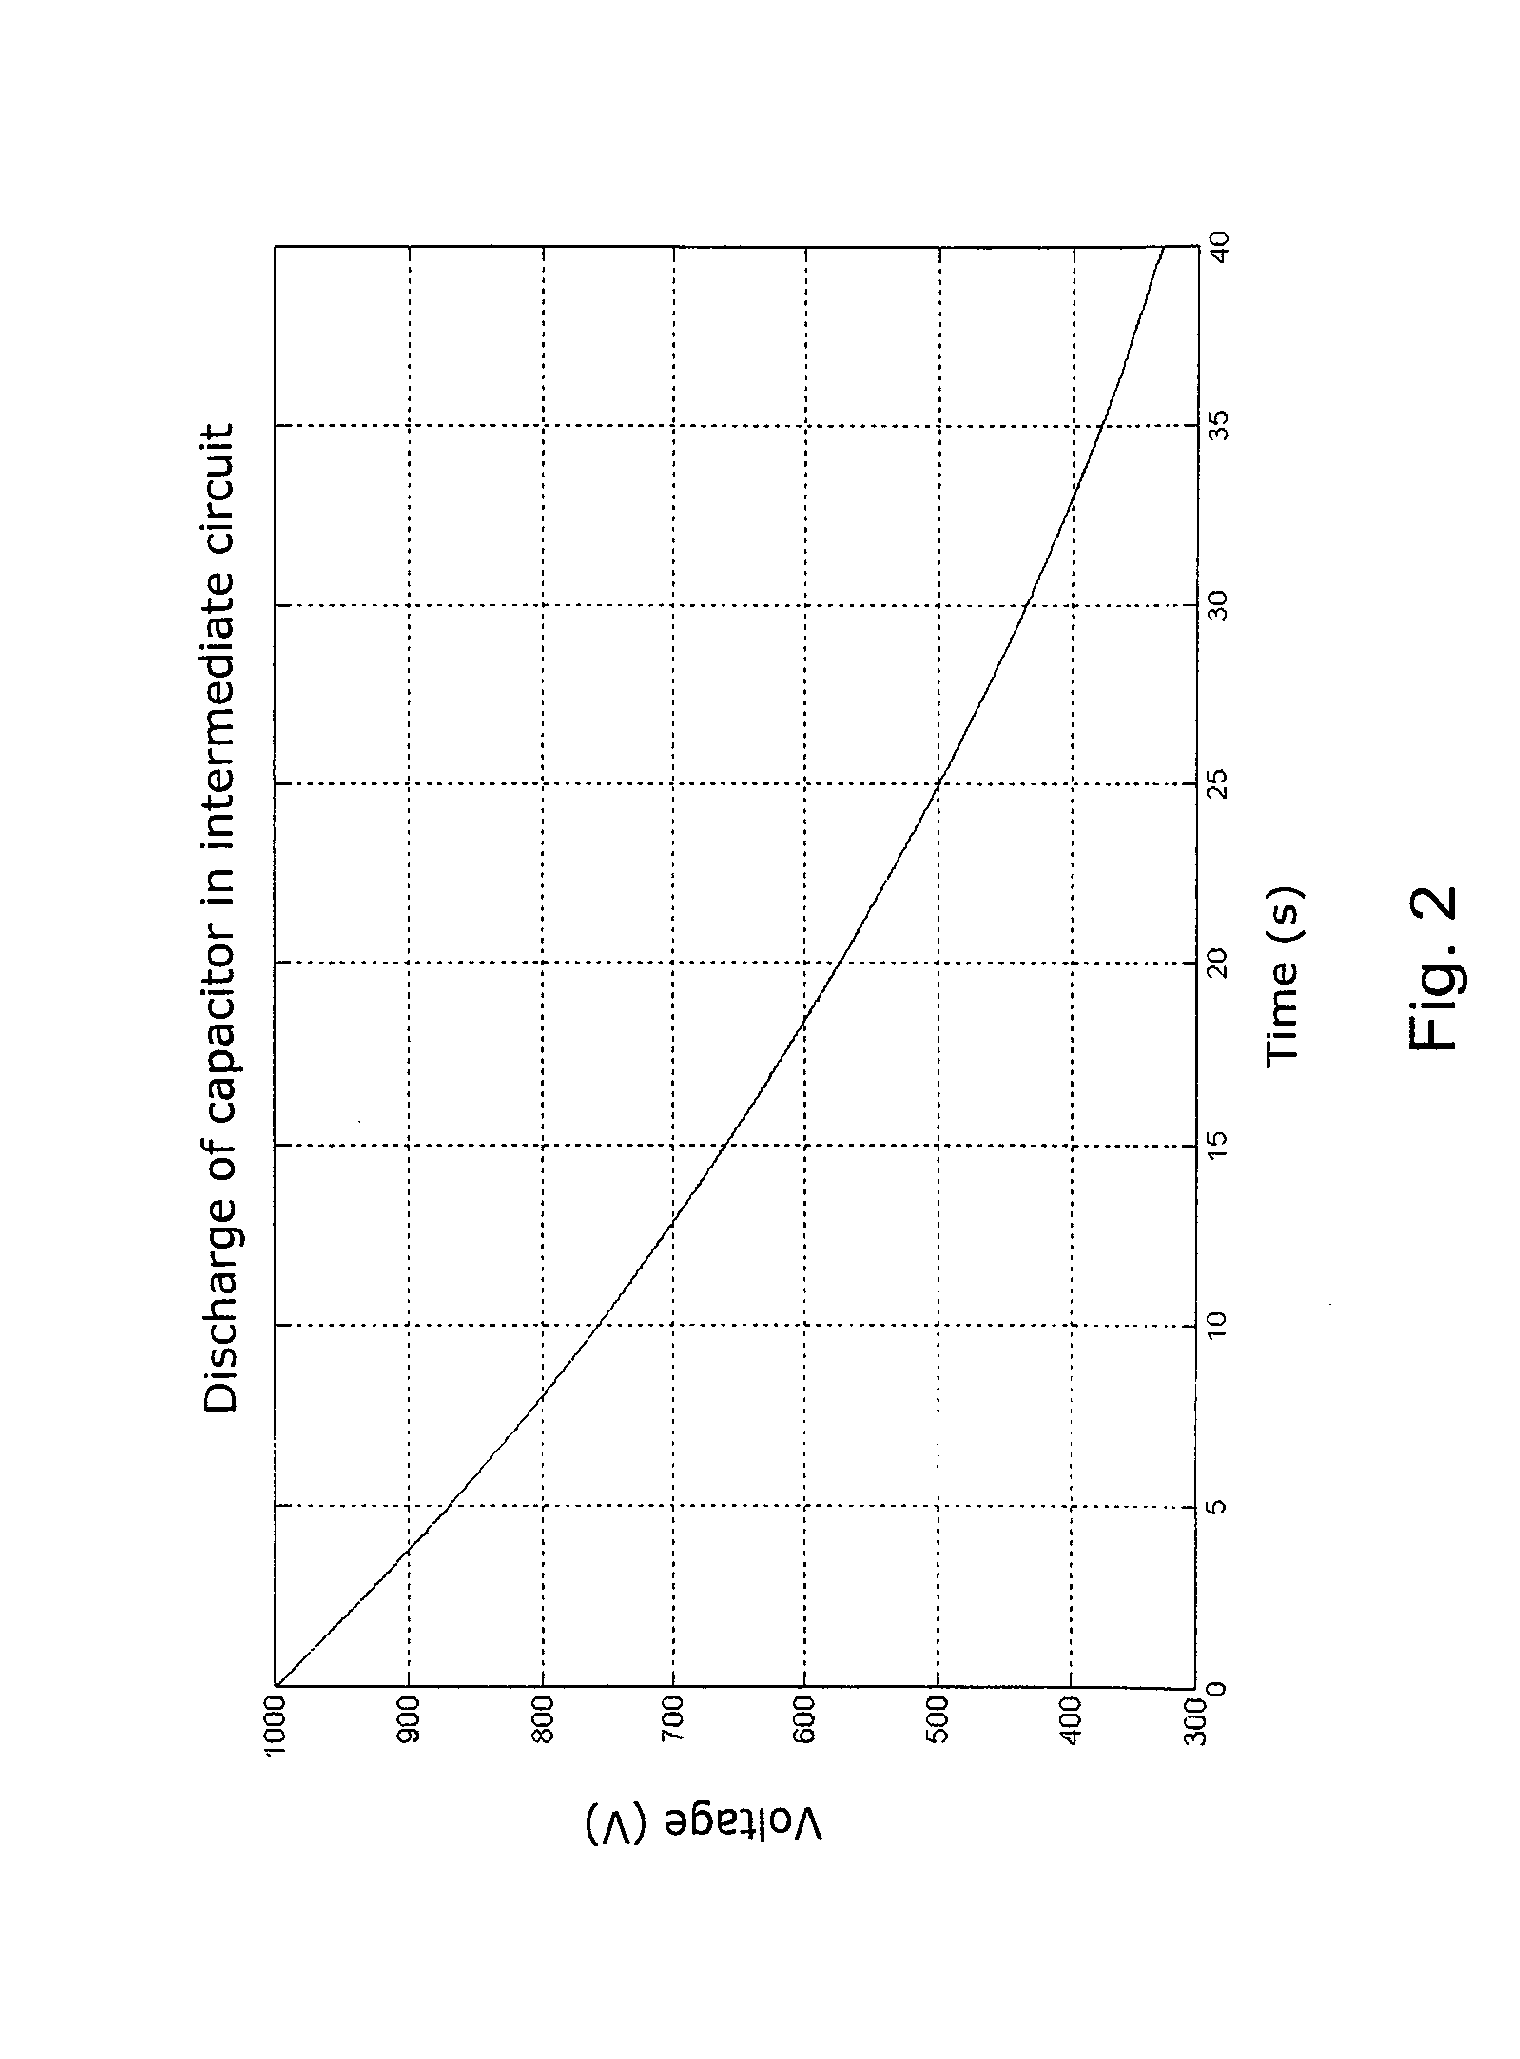 Method for monitoring the condition of the capacitors of a dc-voltage intermediate circuit